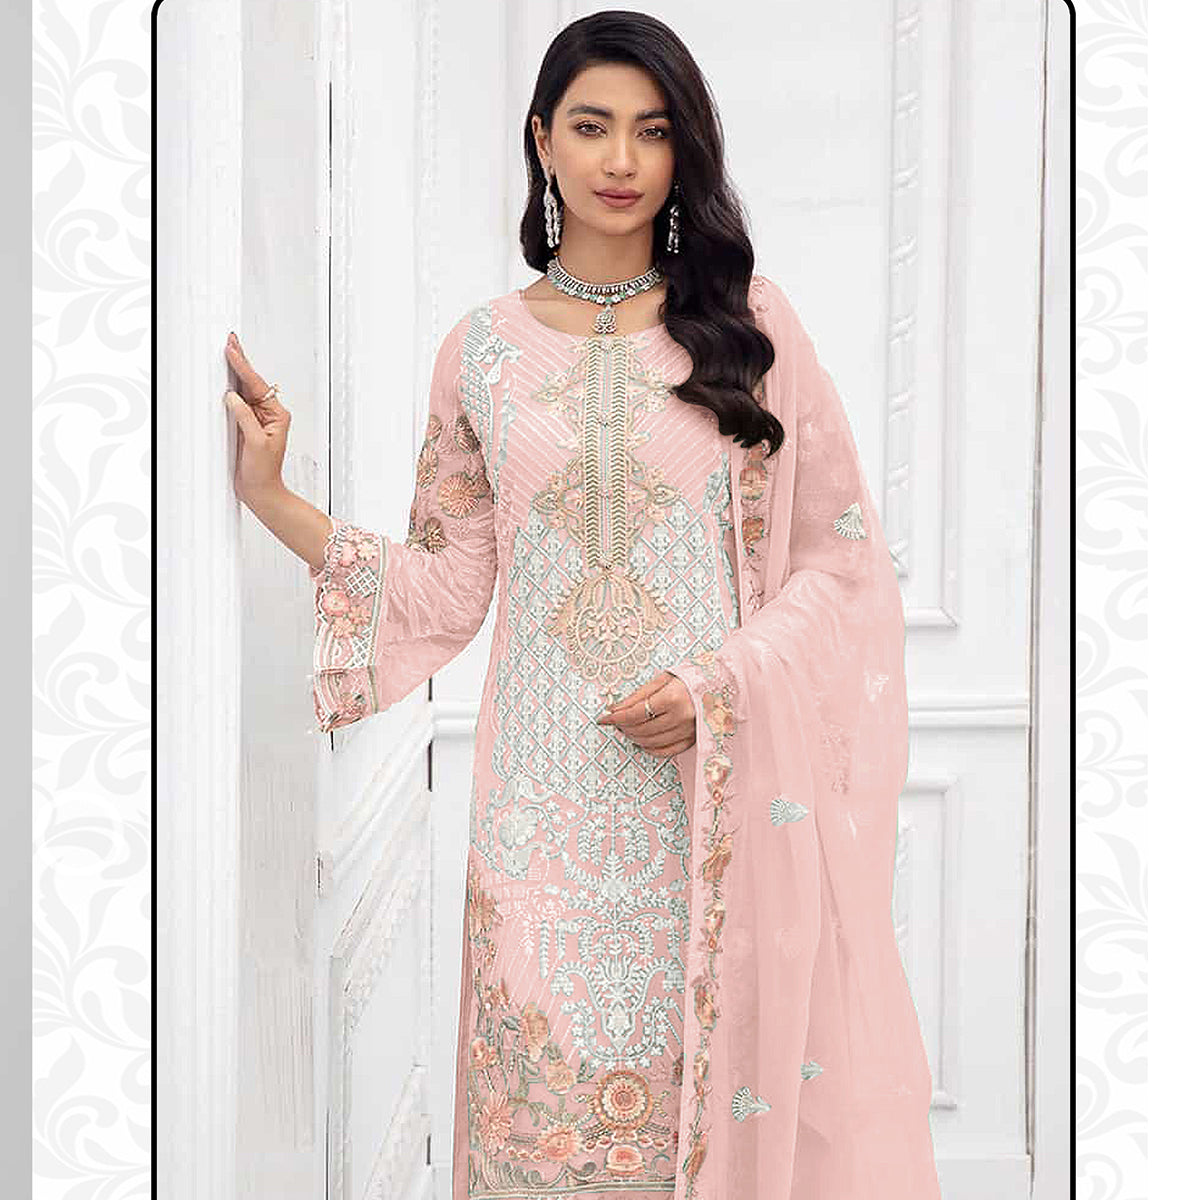 Shafnufab Charizma Georgette Pakistani Suits Collection In Pink Colour